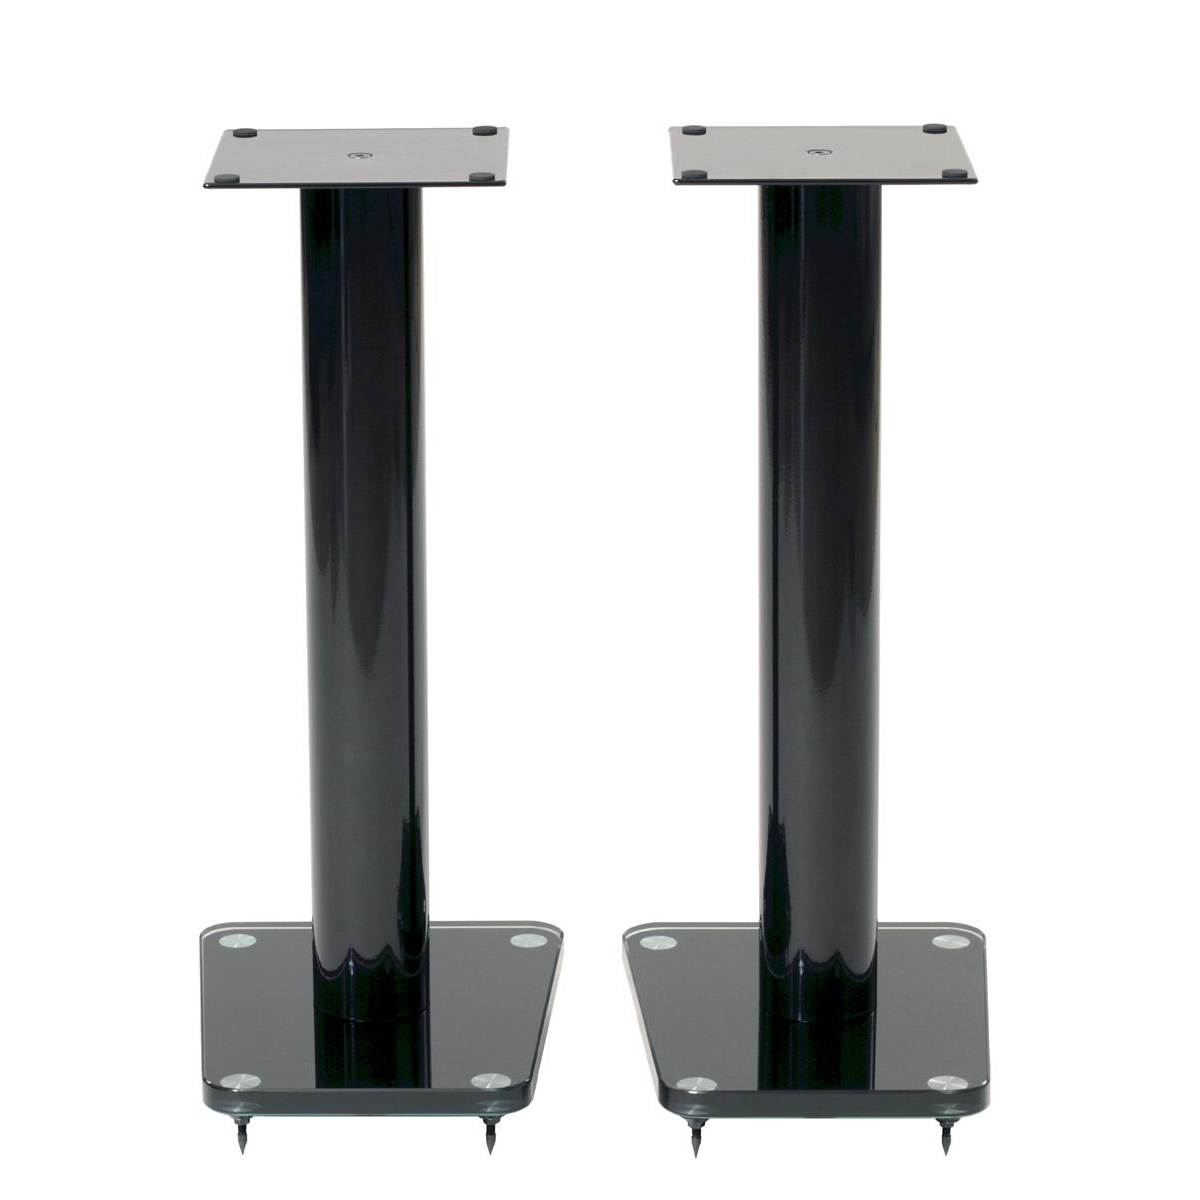 24" Tempered glass & metal speaker stand in gloss black finish. Sold as pair - image 1 of 3